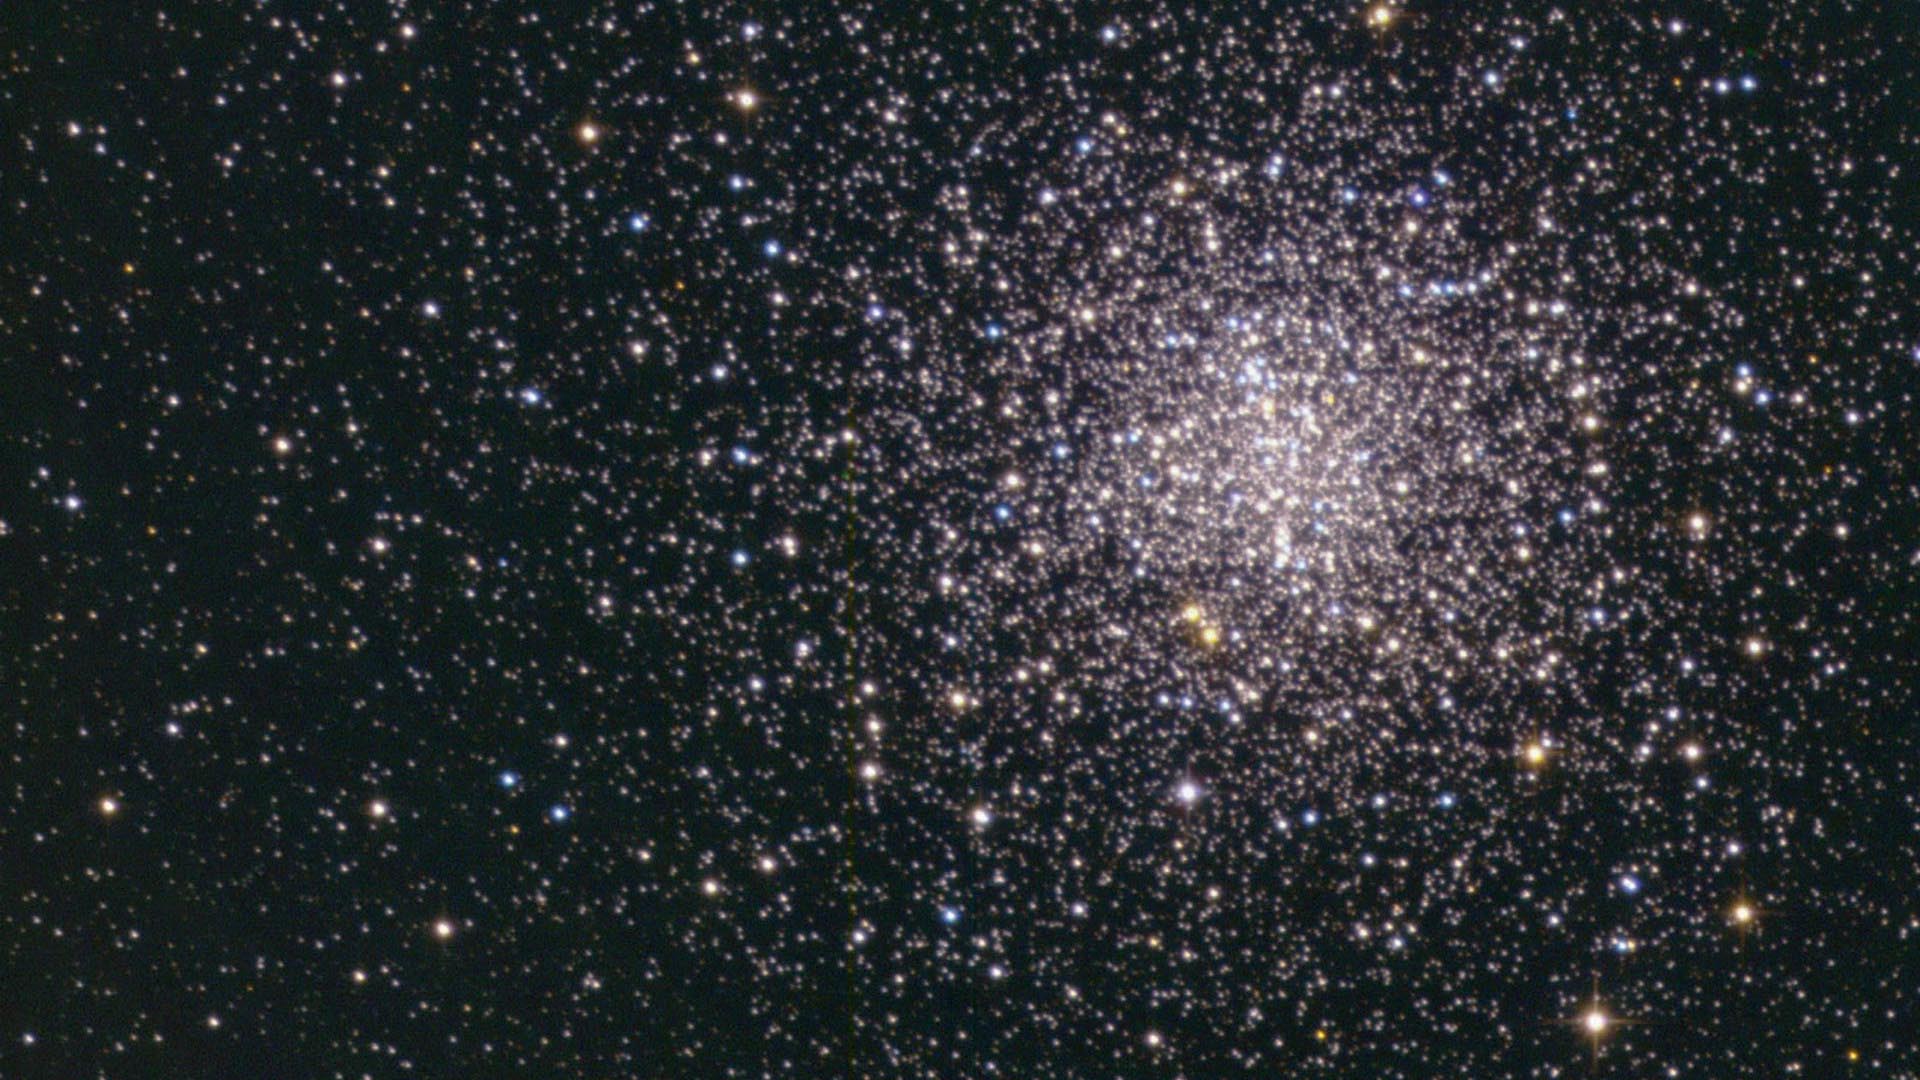 M4 is one of the closest globular clusters to us. Rudolf Dobesberger